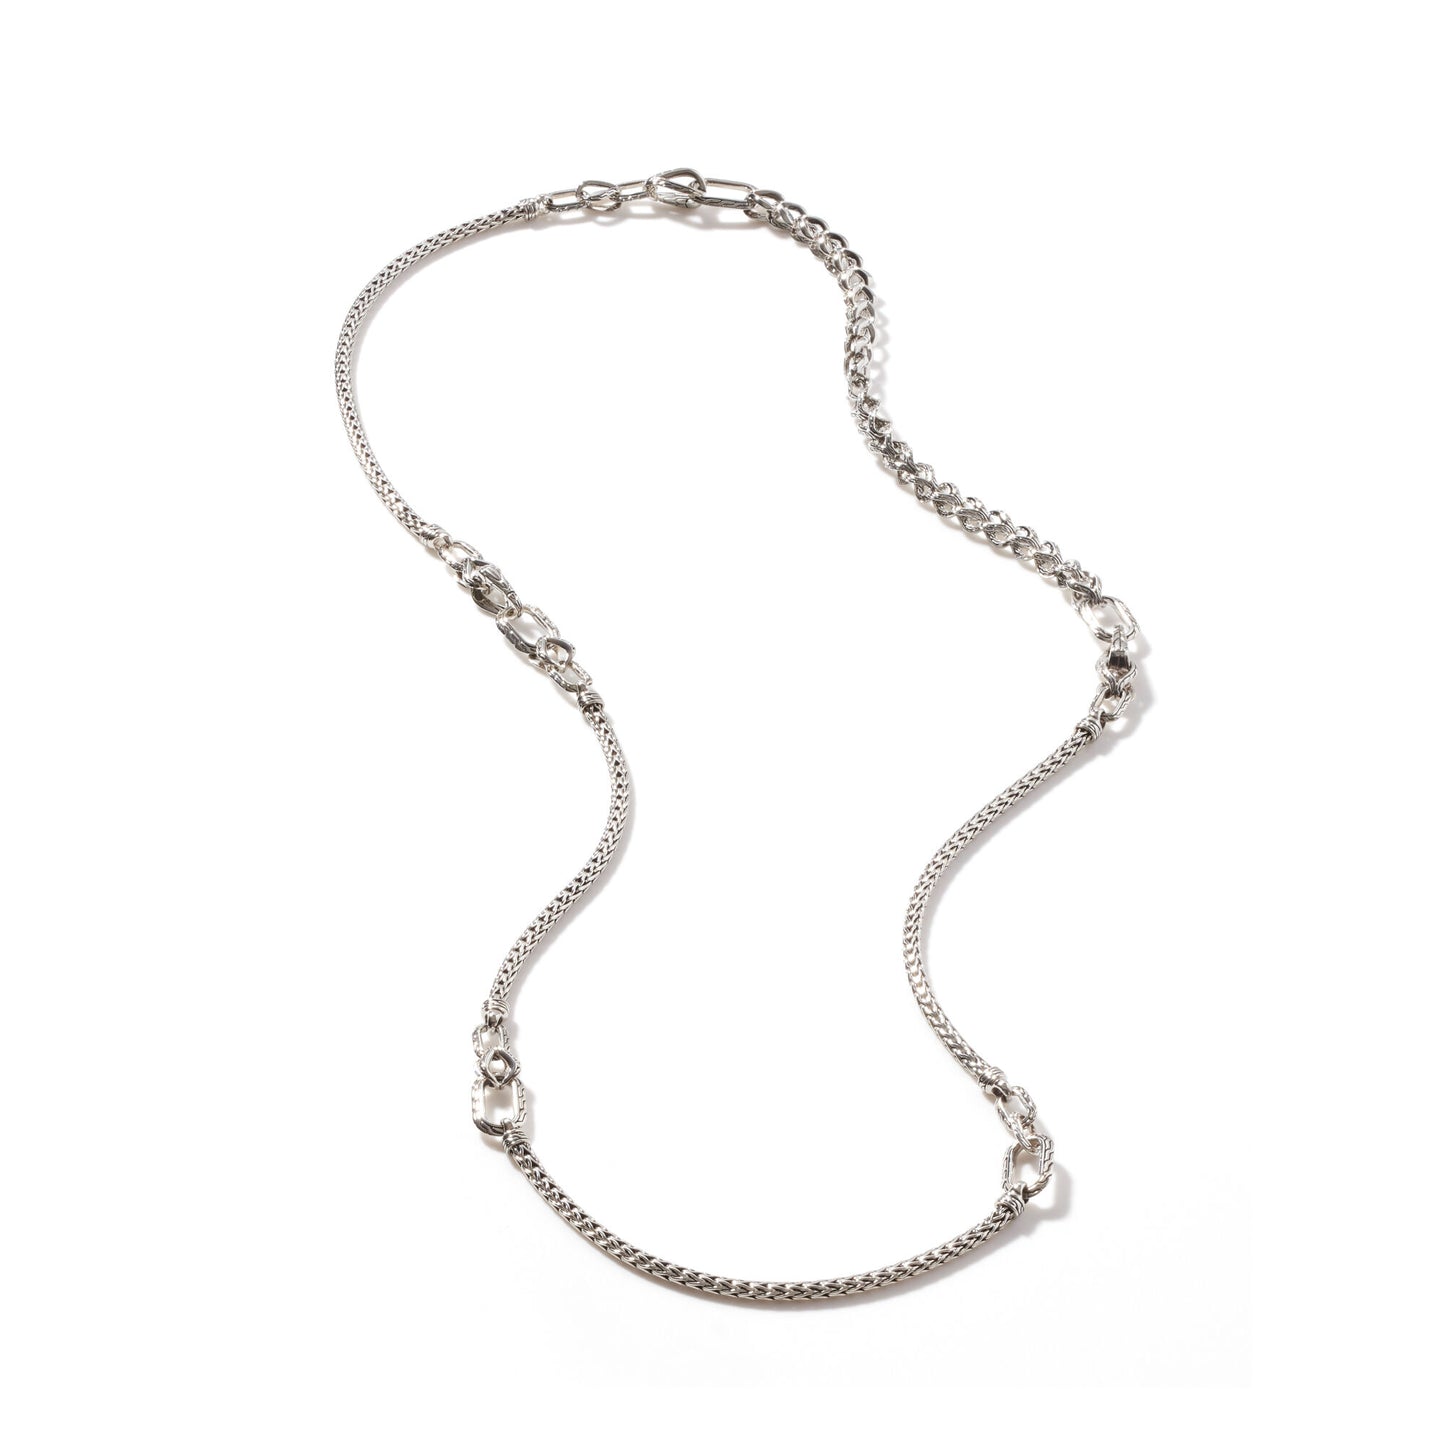 JOHN HARDY NECKLACE - TRANSFORMABLE